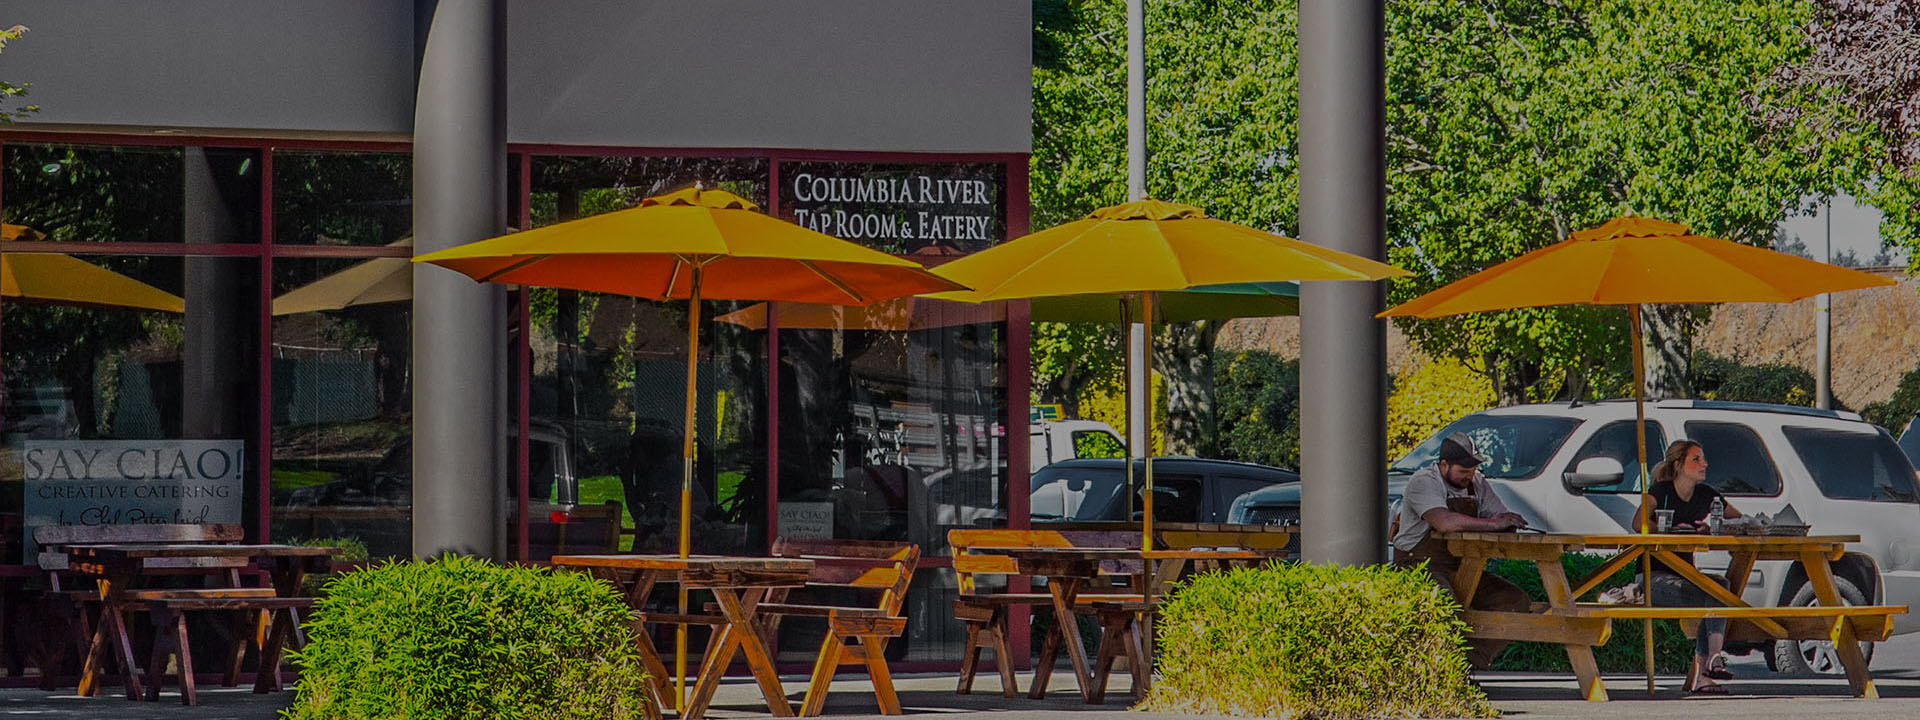 Columbia River Tap Room & Eatery